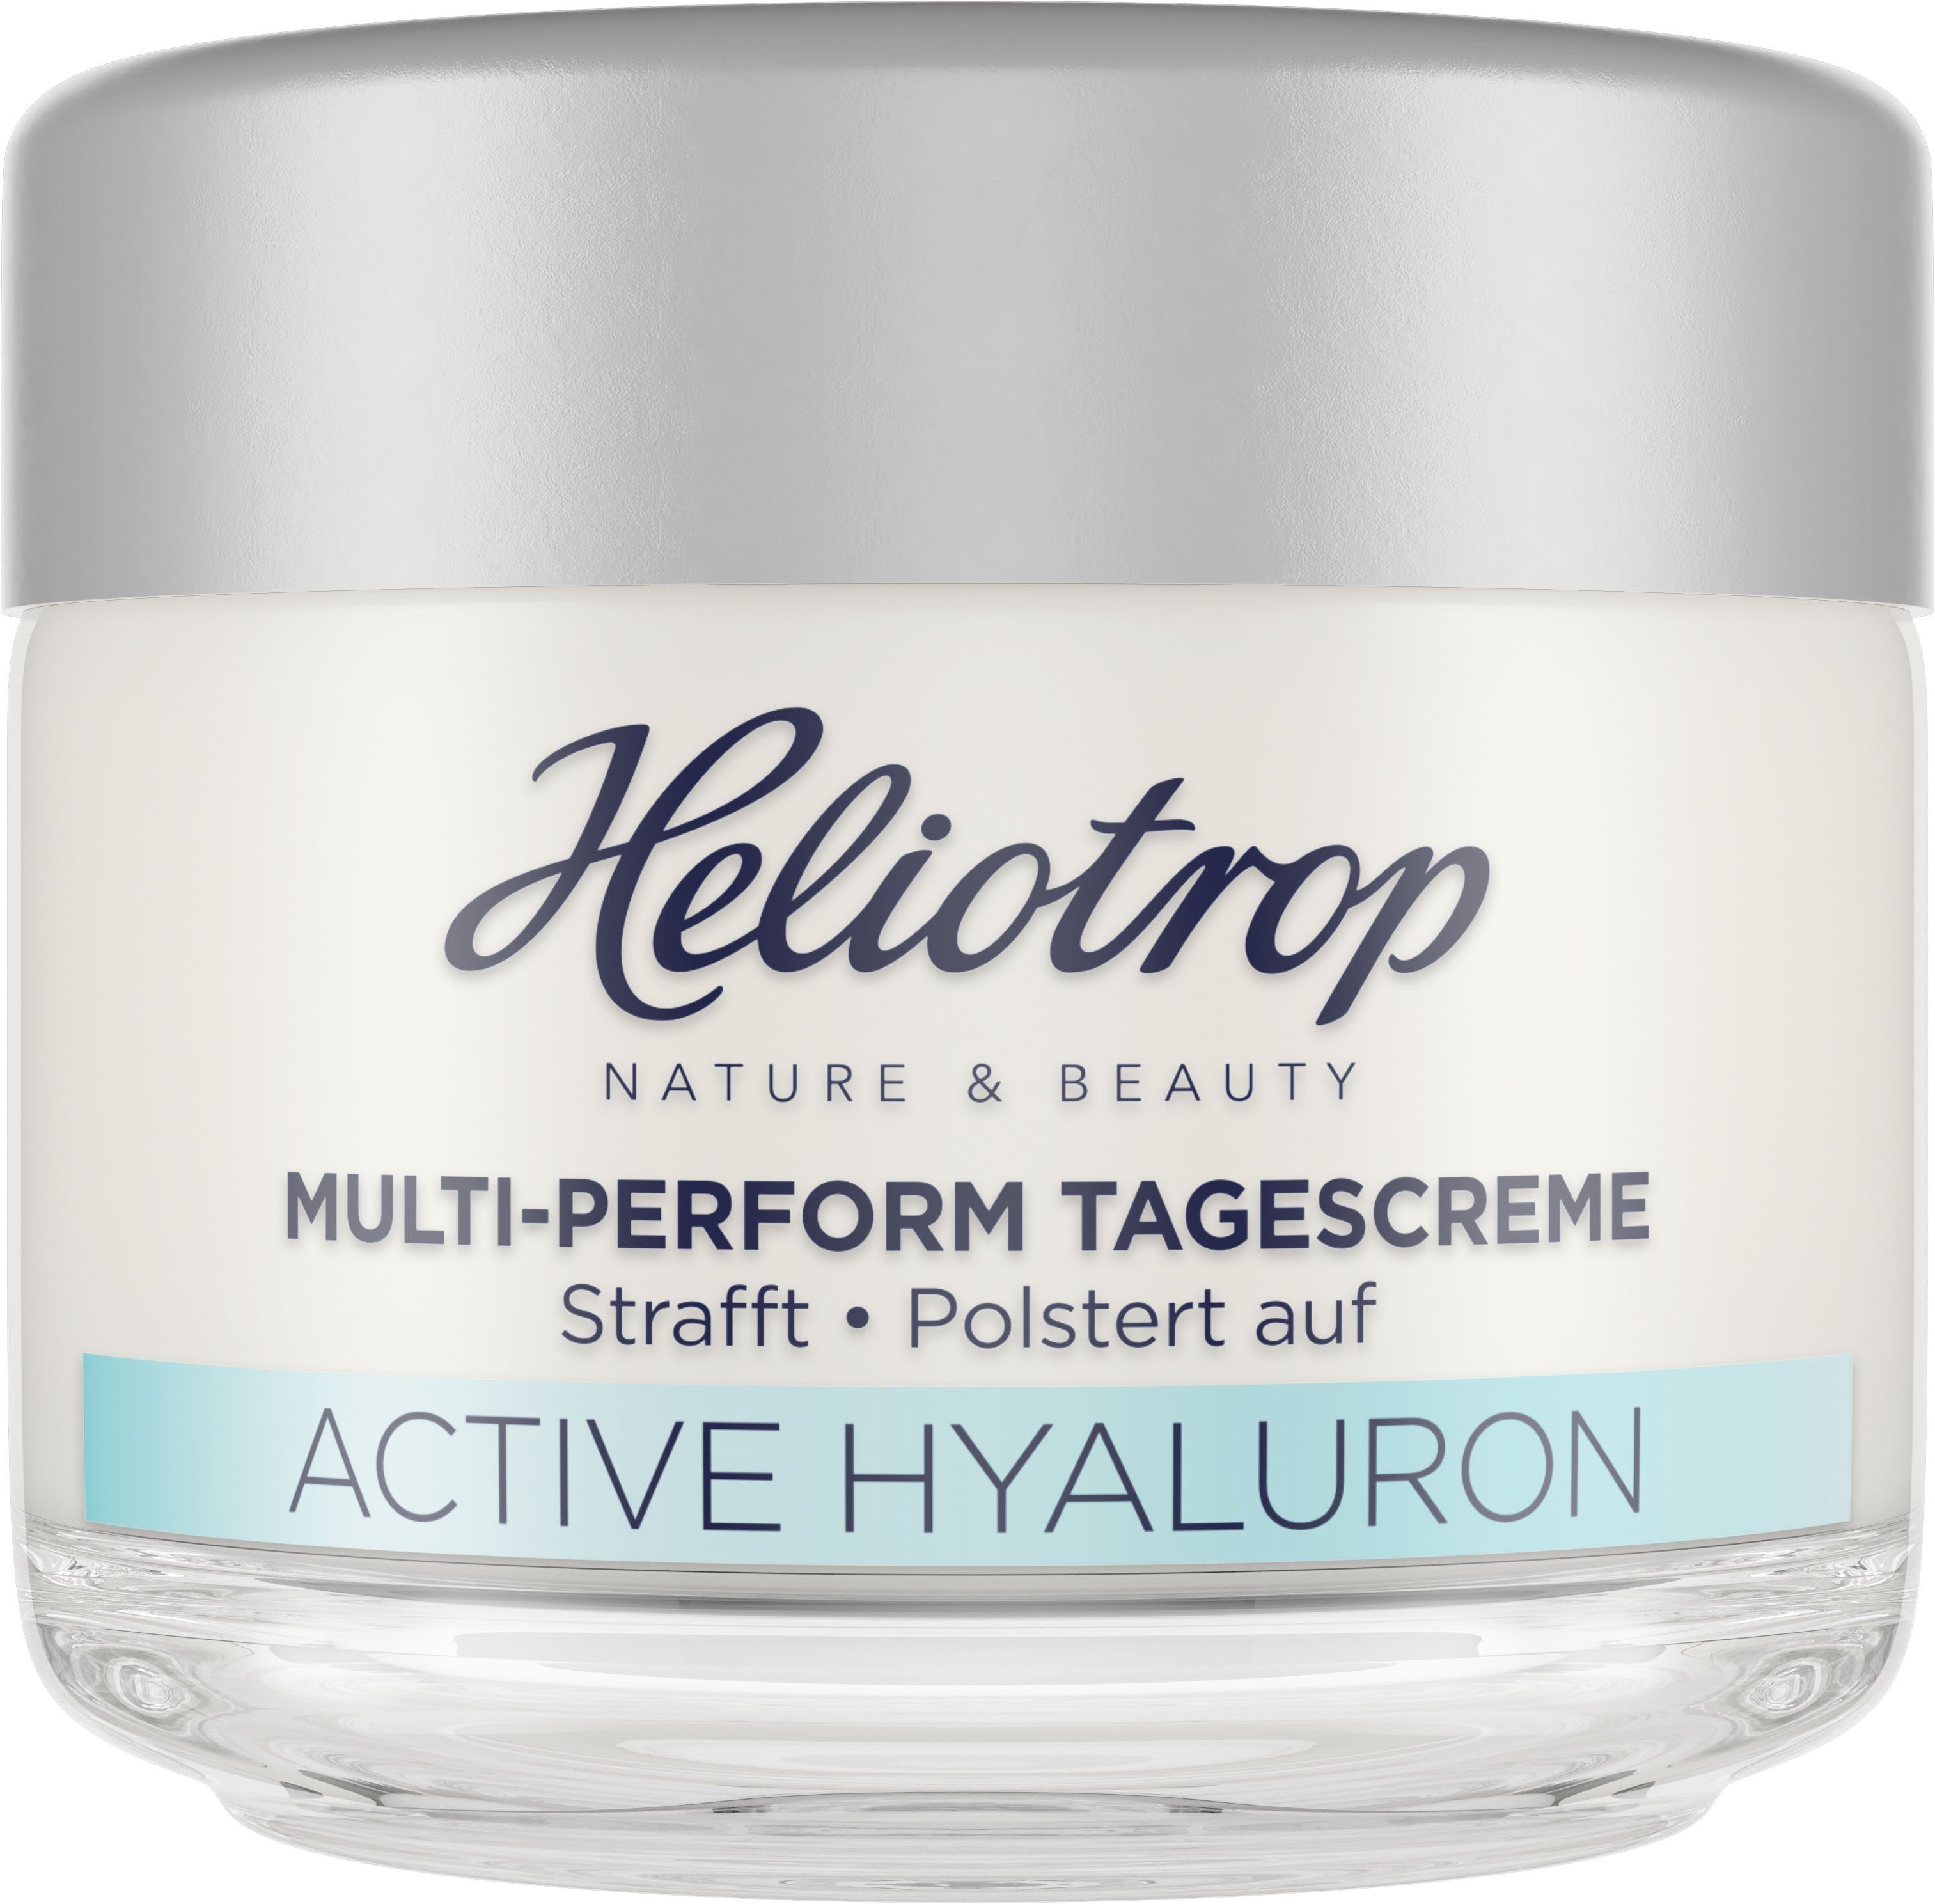 HELIOTROP Tagescreme Active Hyaluron